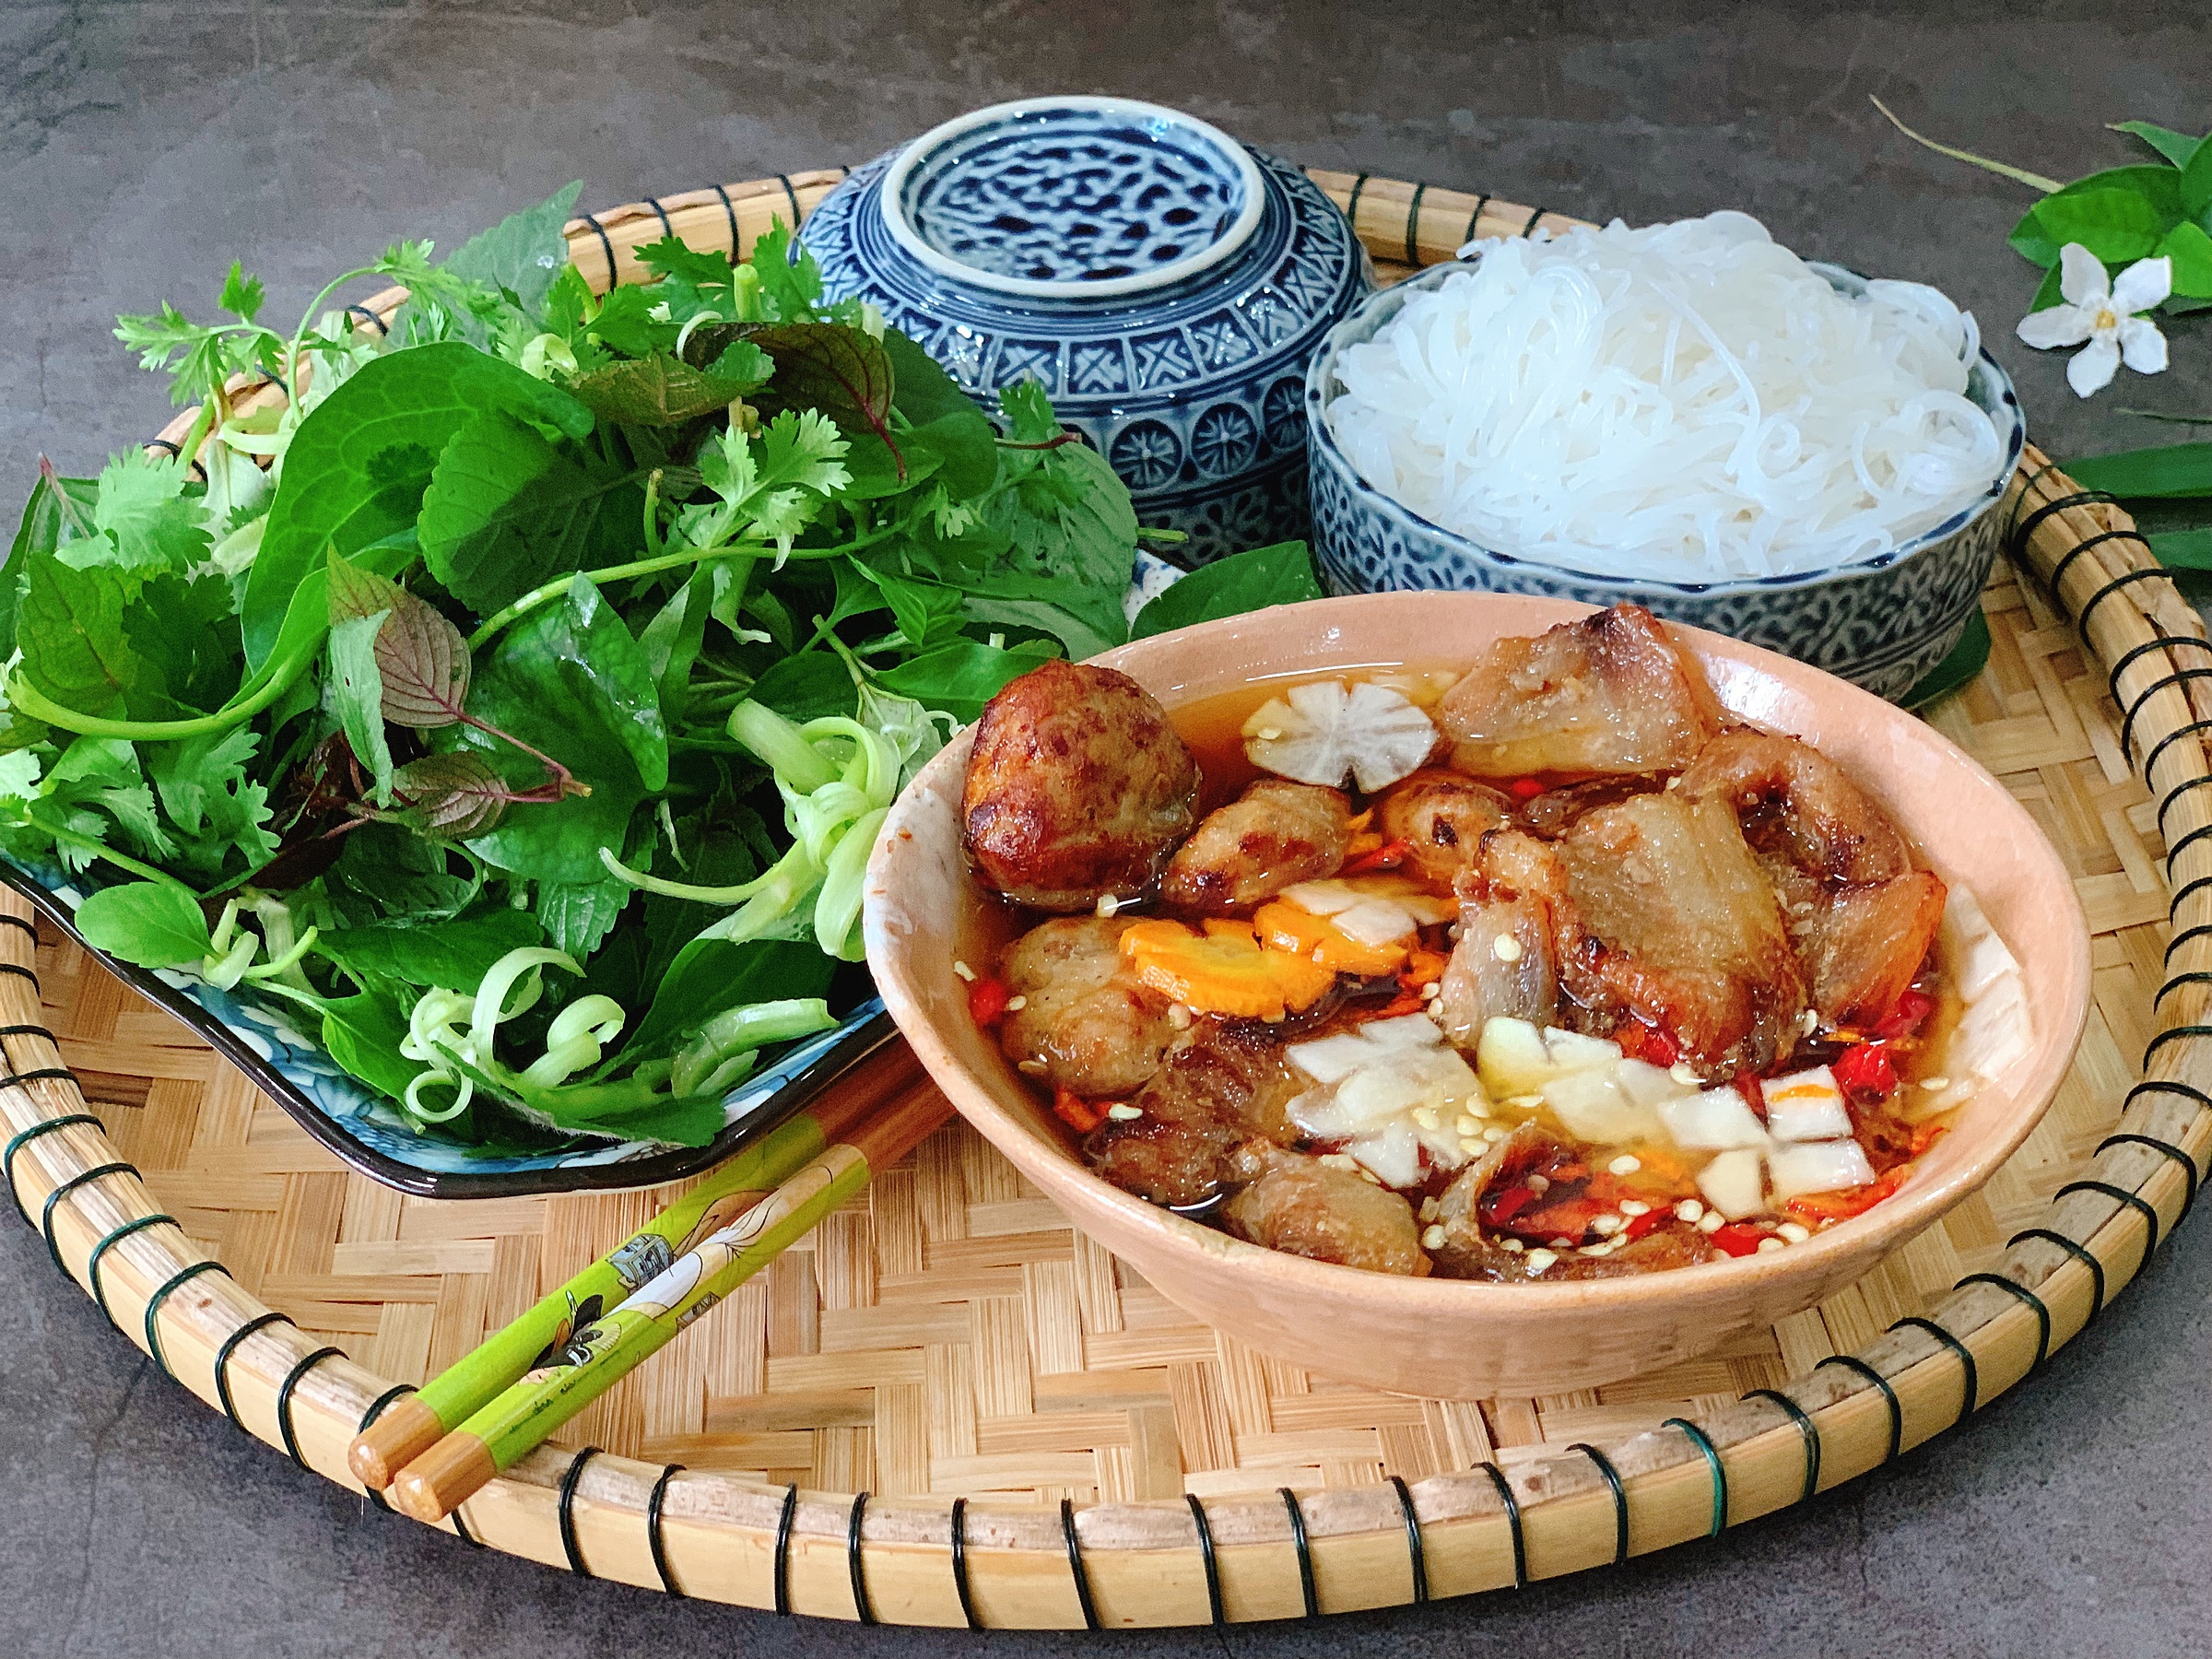 Bun cha is an amazing Vietnamese dish and is the perfect way to add some flavor to your day.